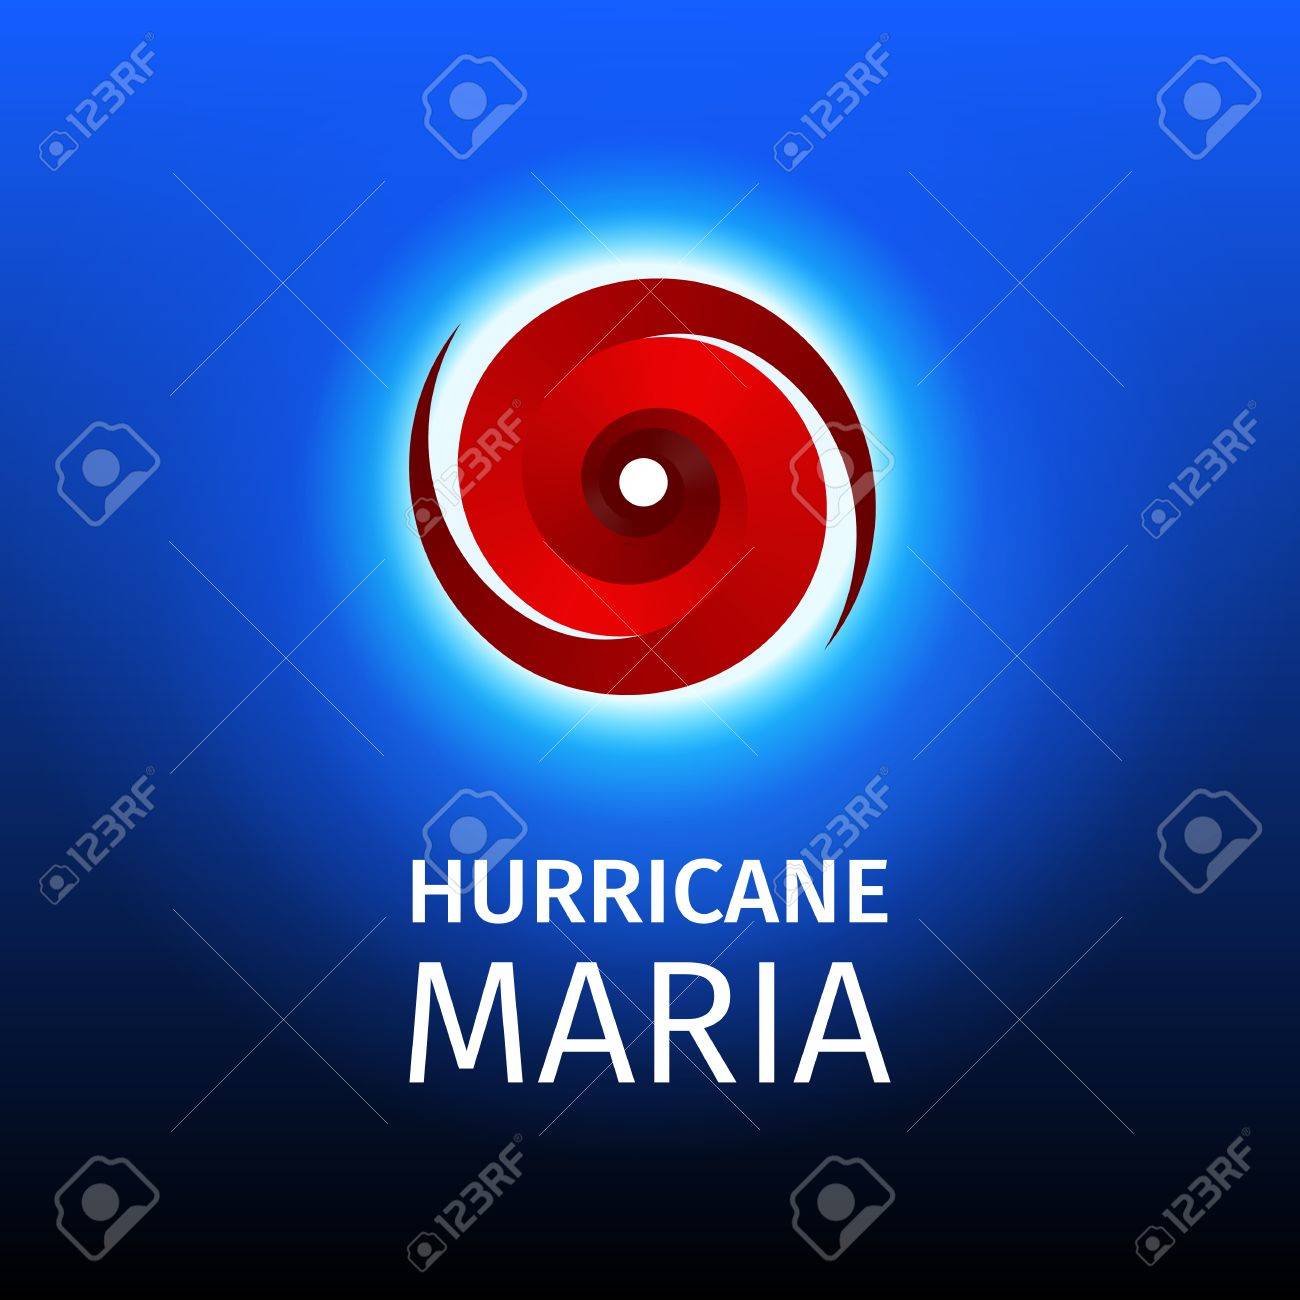 Graphic Banner Of Hurricane Maria. Icon / Sign / Symbol Of The 